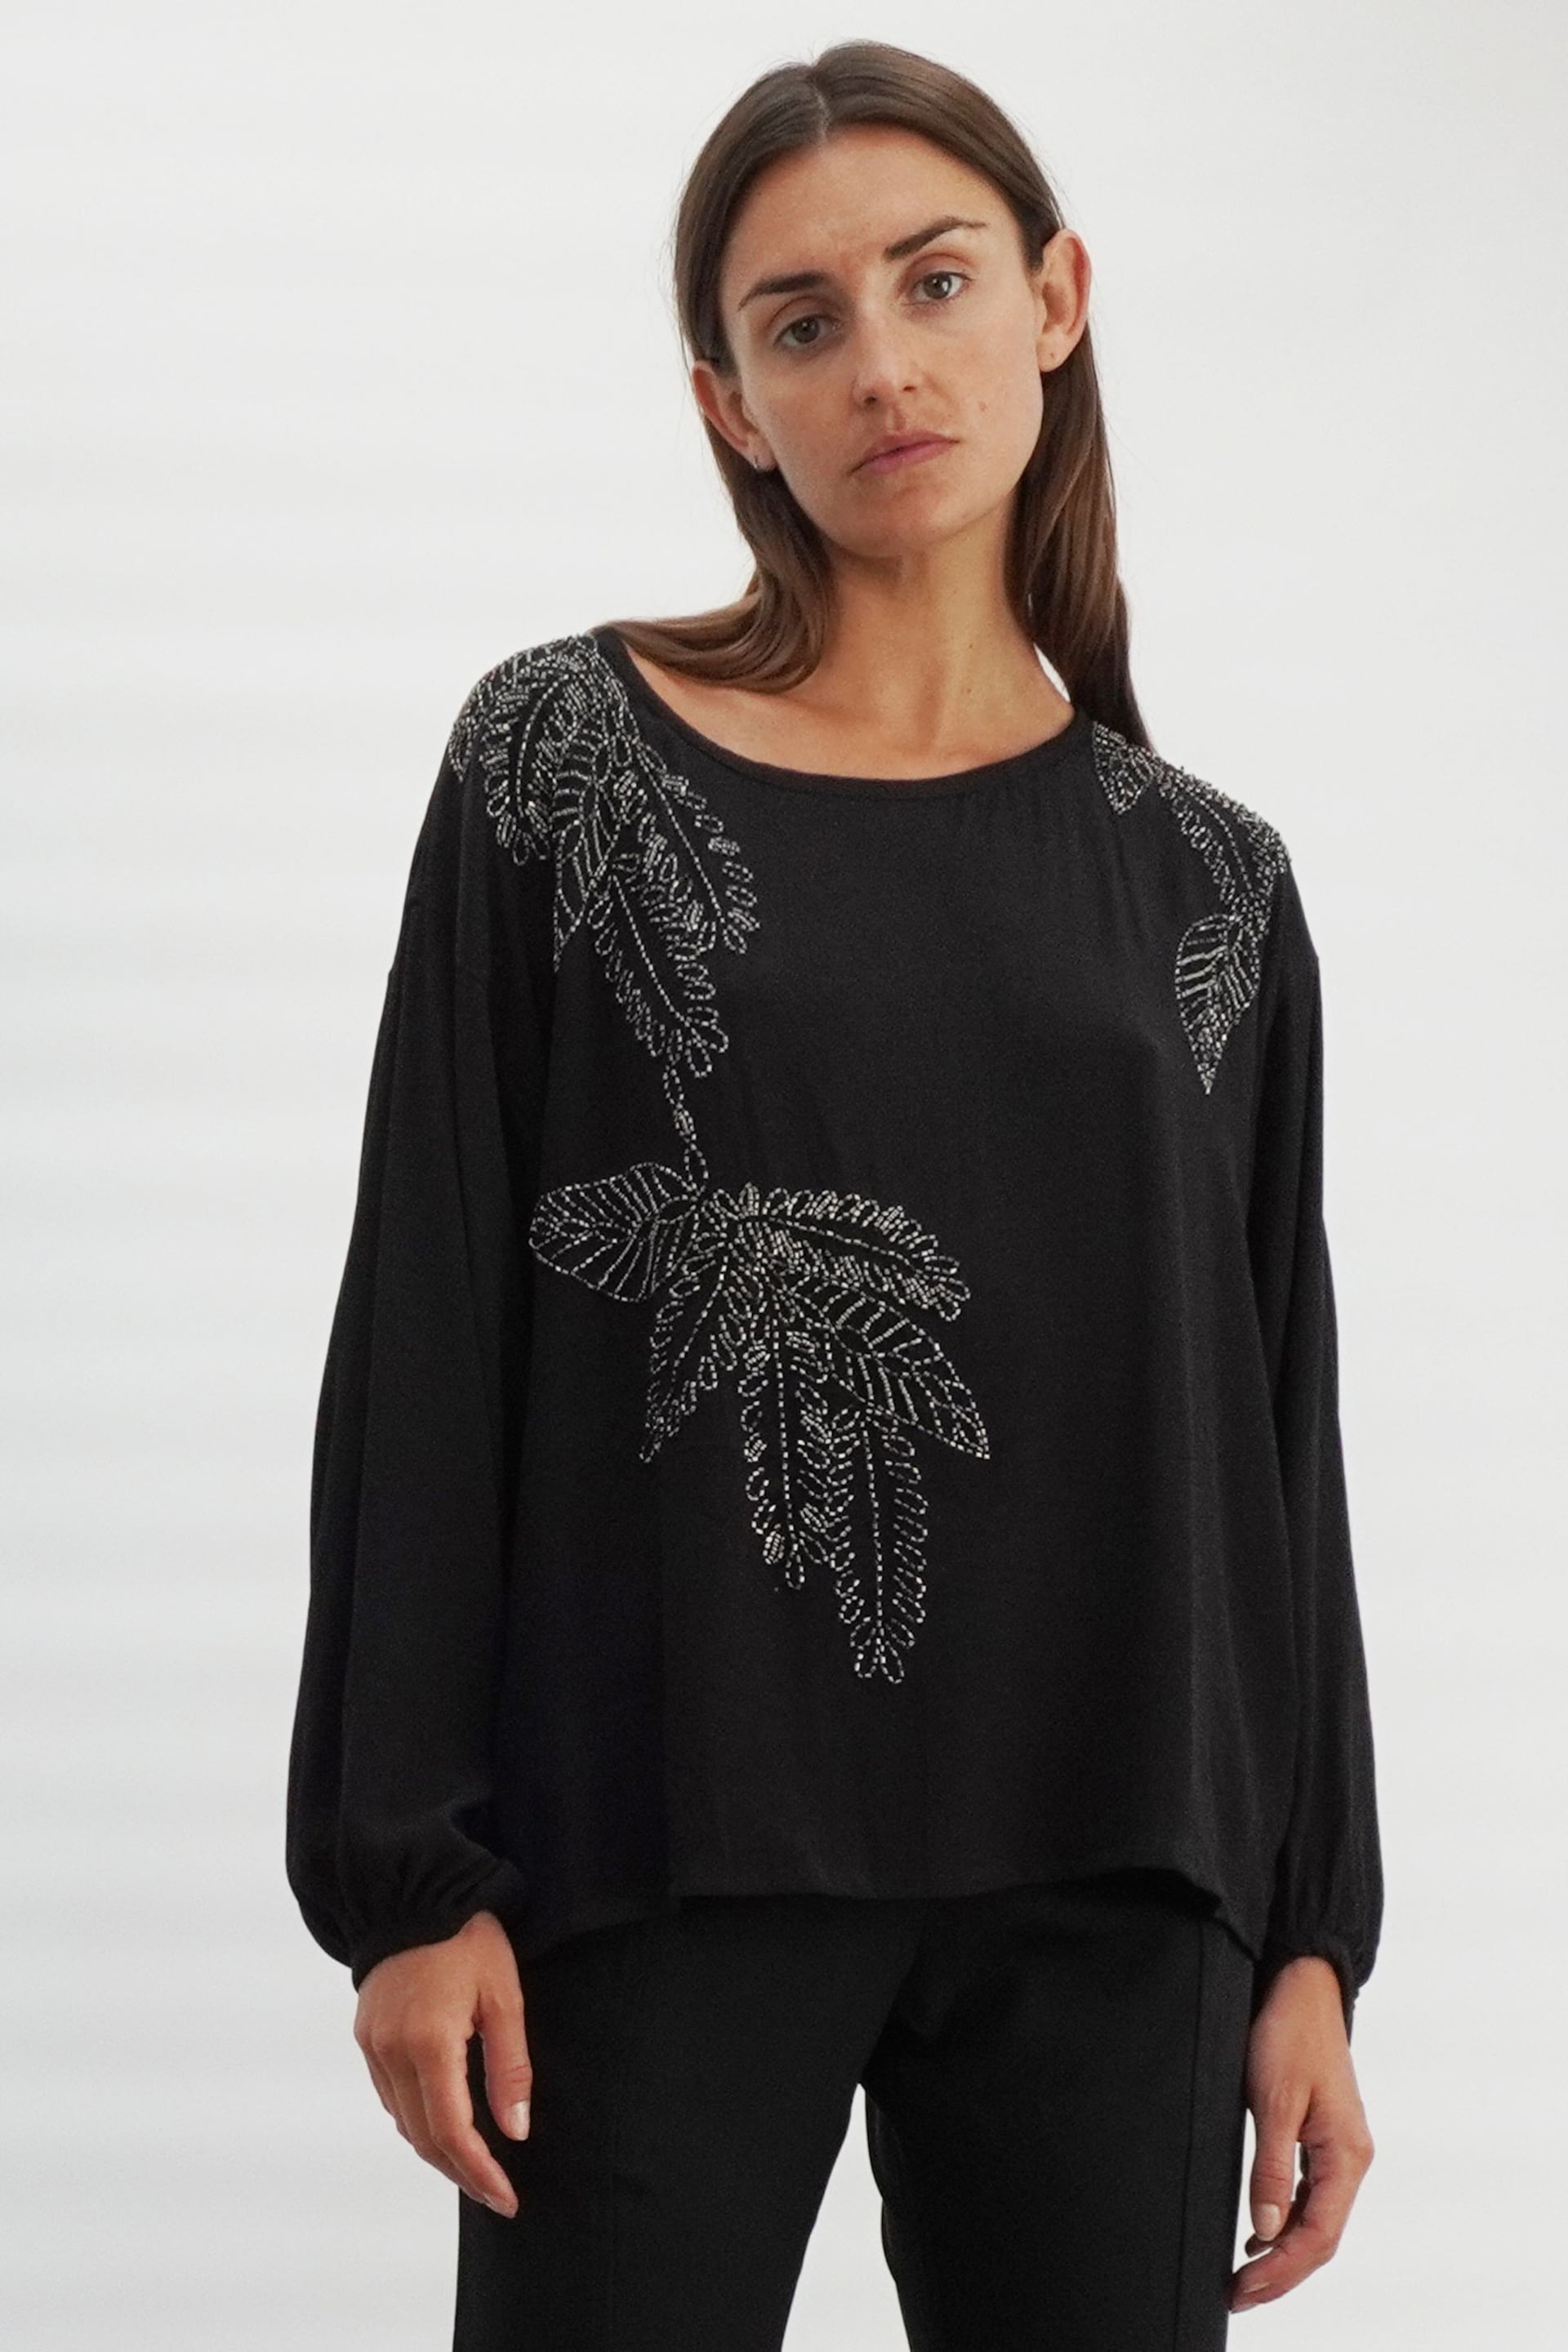 Religion Black Off The Shoulder Top With Hand-Beaded Leaf Motifs - Image 1 of 8